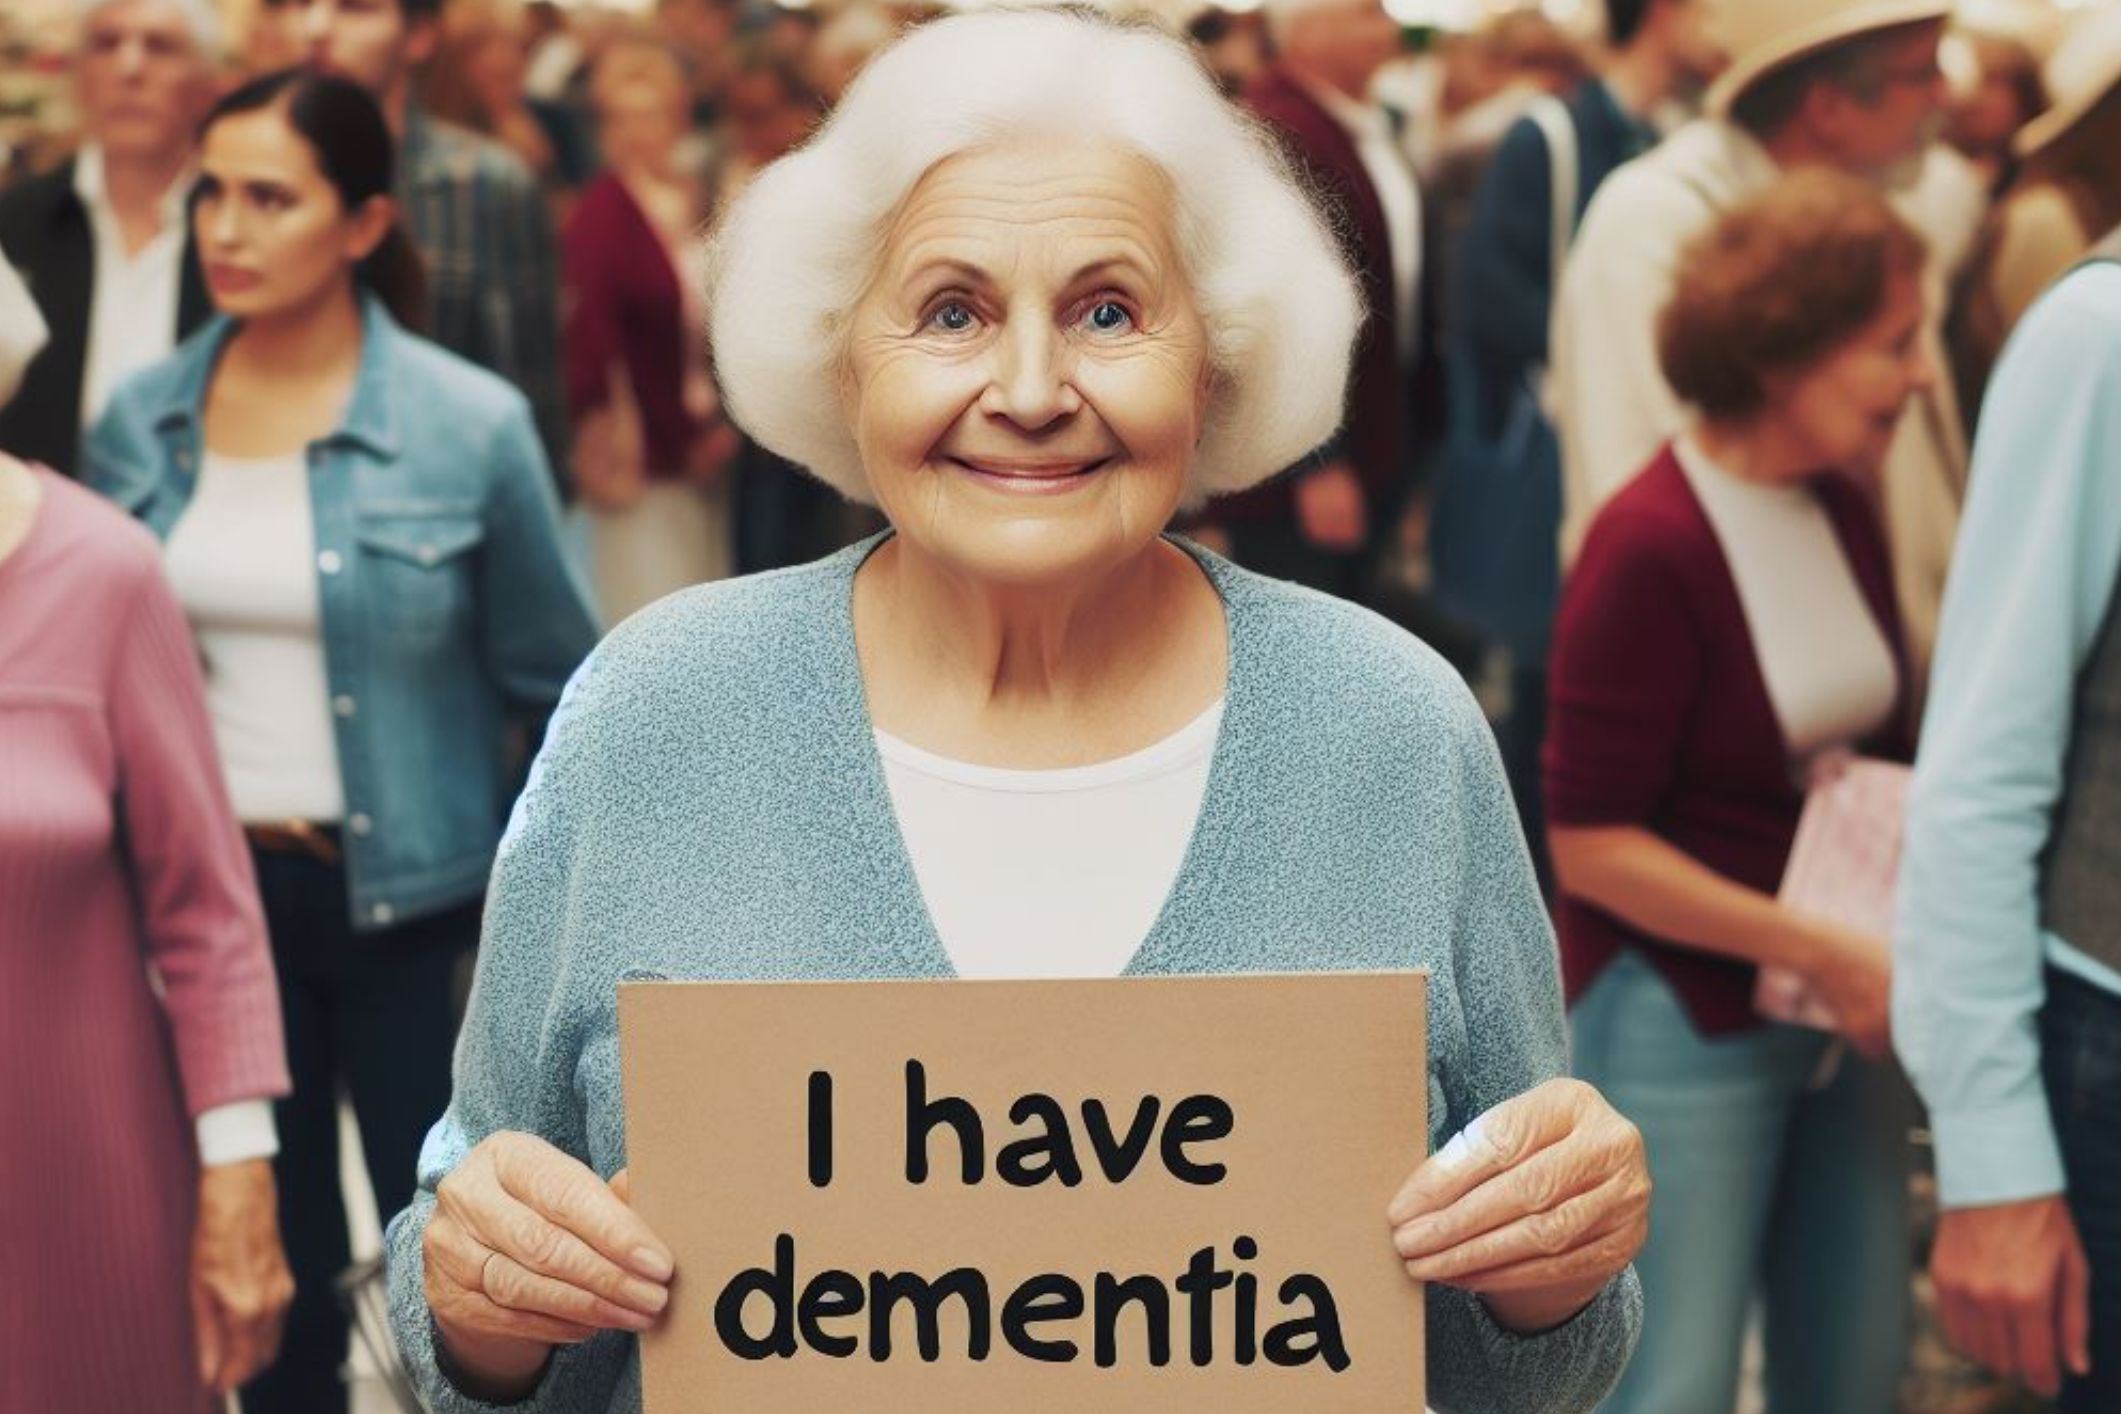 Should there be a visual identifier for people living with dementia out in public?